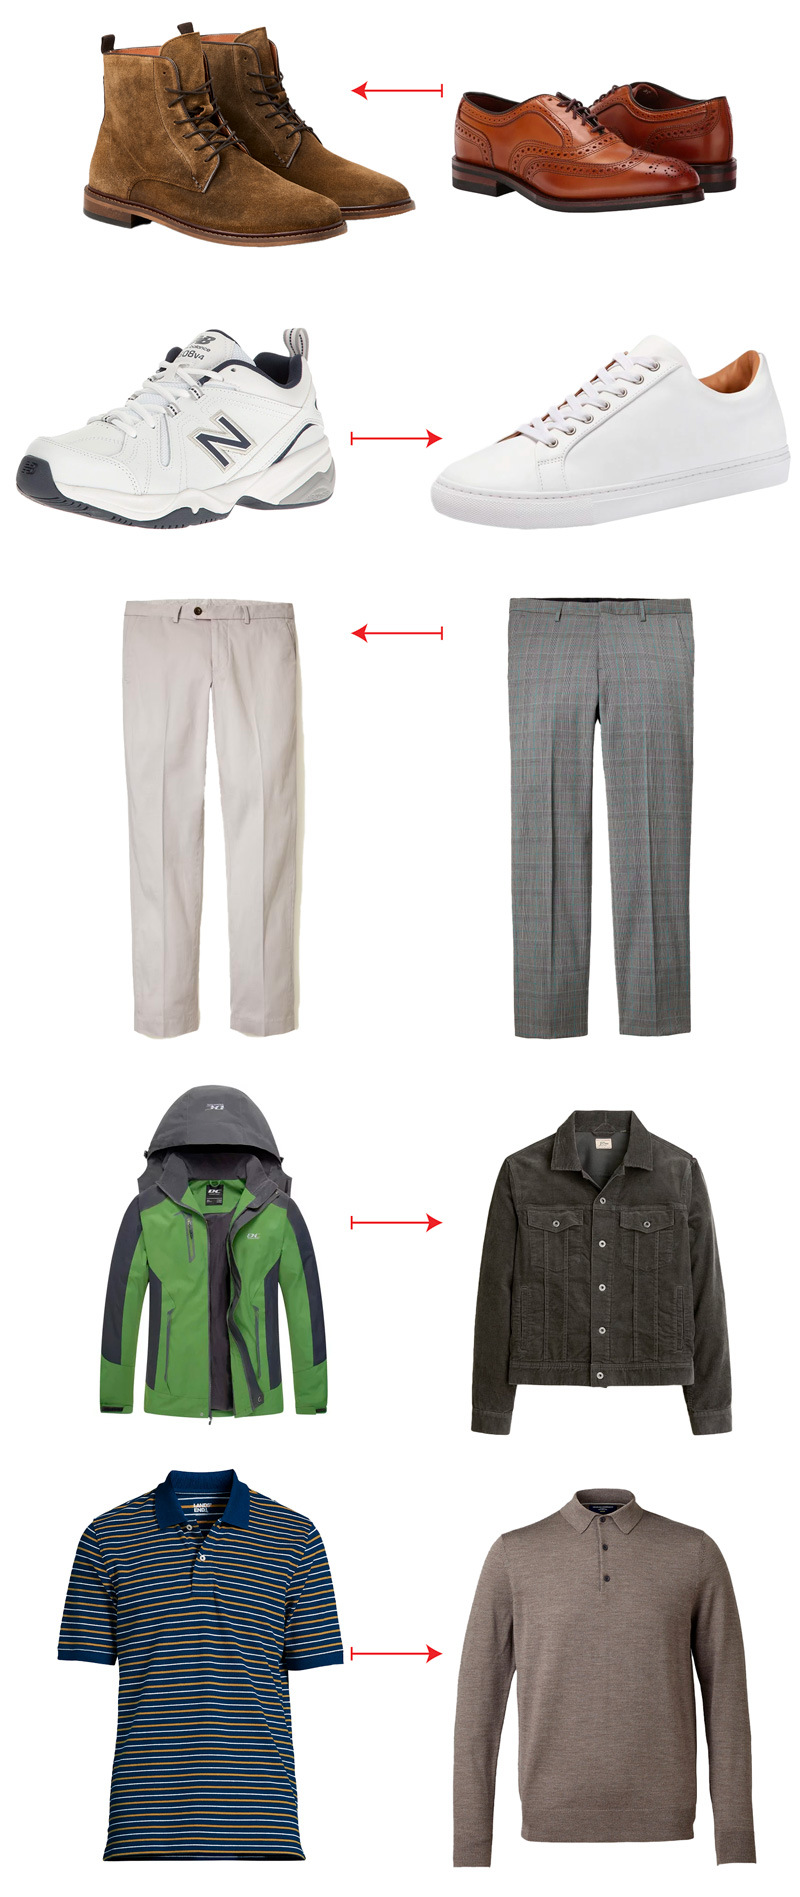 2 columns of men's clothing items, left side casual, right side dressier, with an arrow for each pointing in a specific direction to make an outfit more smart casual. suede boots are preferred over dress shoes. low profile dressy sneakers are preferred over casual chunky sneakers. dress chinos are preferred over dress pants. a gray trucker jacket is preferred over a technical jacket. a knit long sleeve polo is preferred over a striped golf polo. 